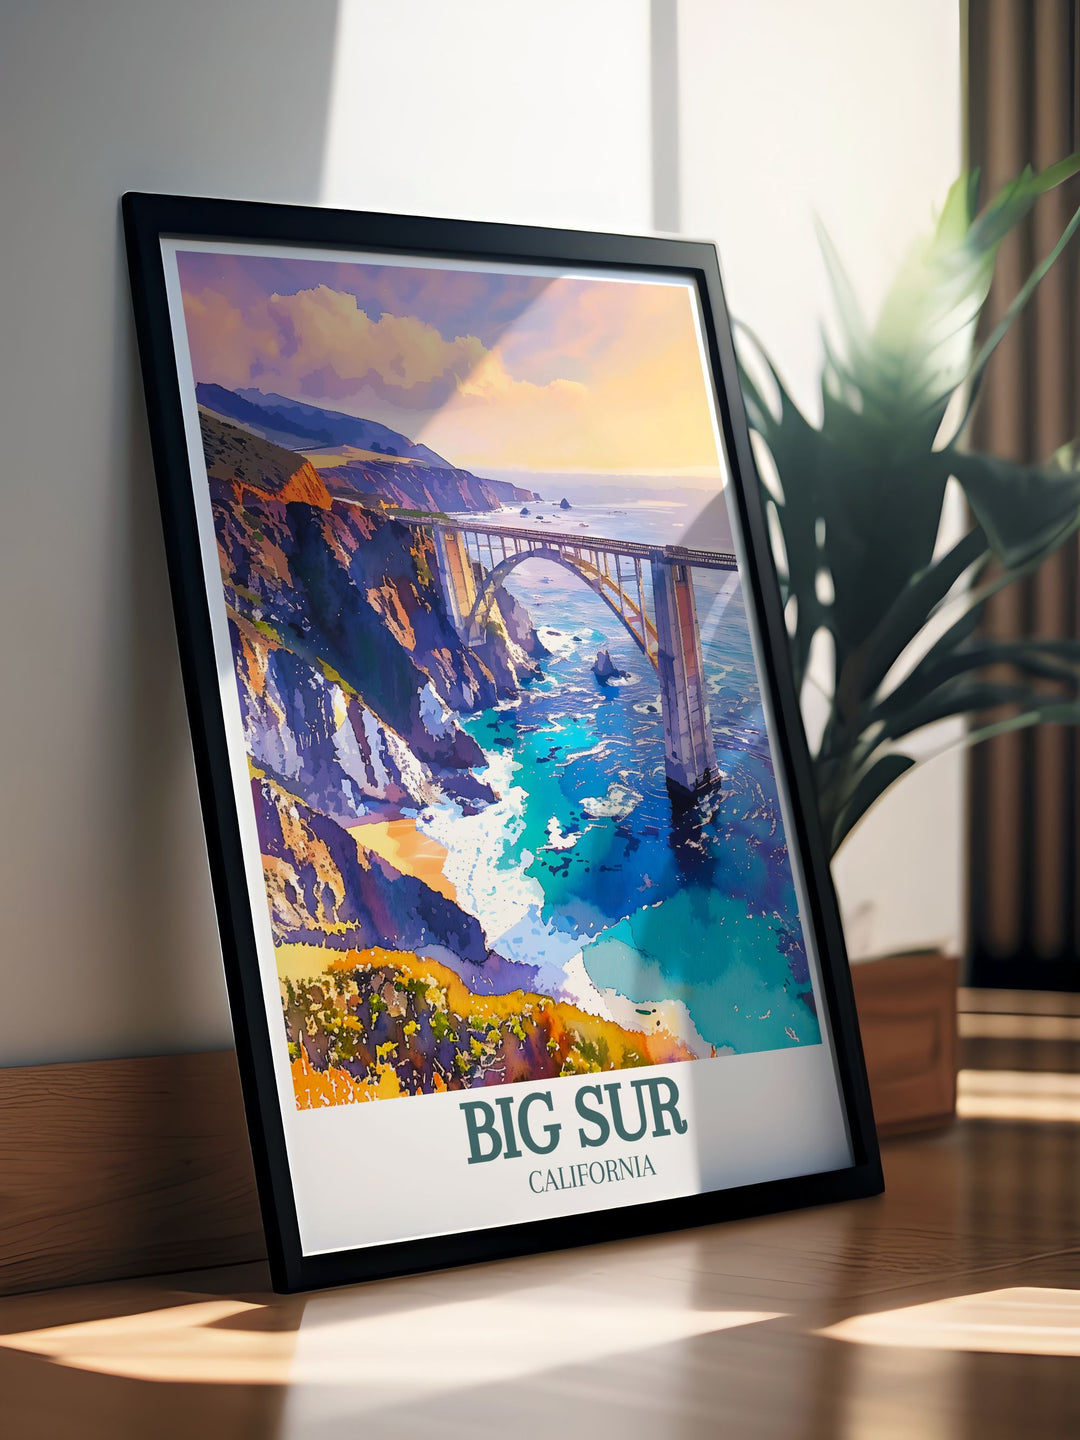 Highlighting the breathtaking views of the Pacific Ocean, this travel poster showcases the scenic beauty of Big Sur and the architectural marvel of Bixby Creek Bridge, ideal for nature enthusiasts and home decor lovers.